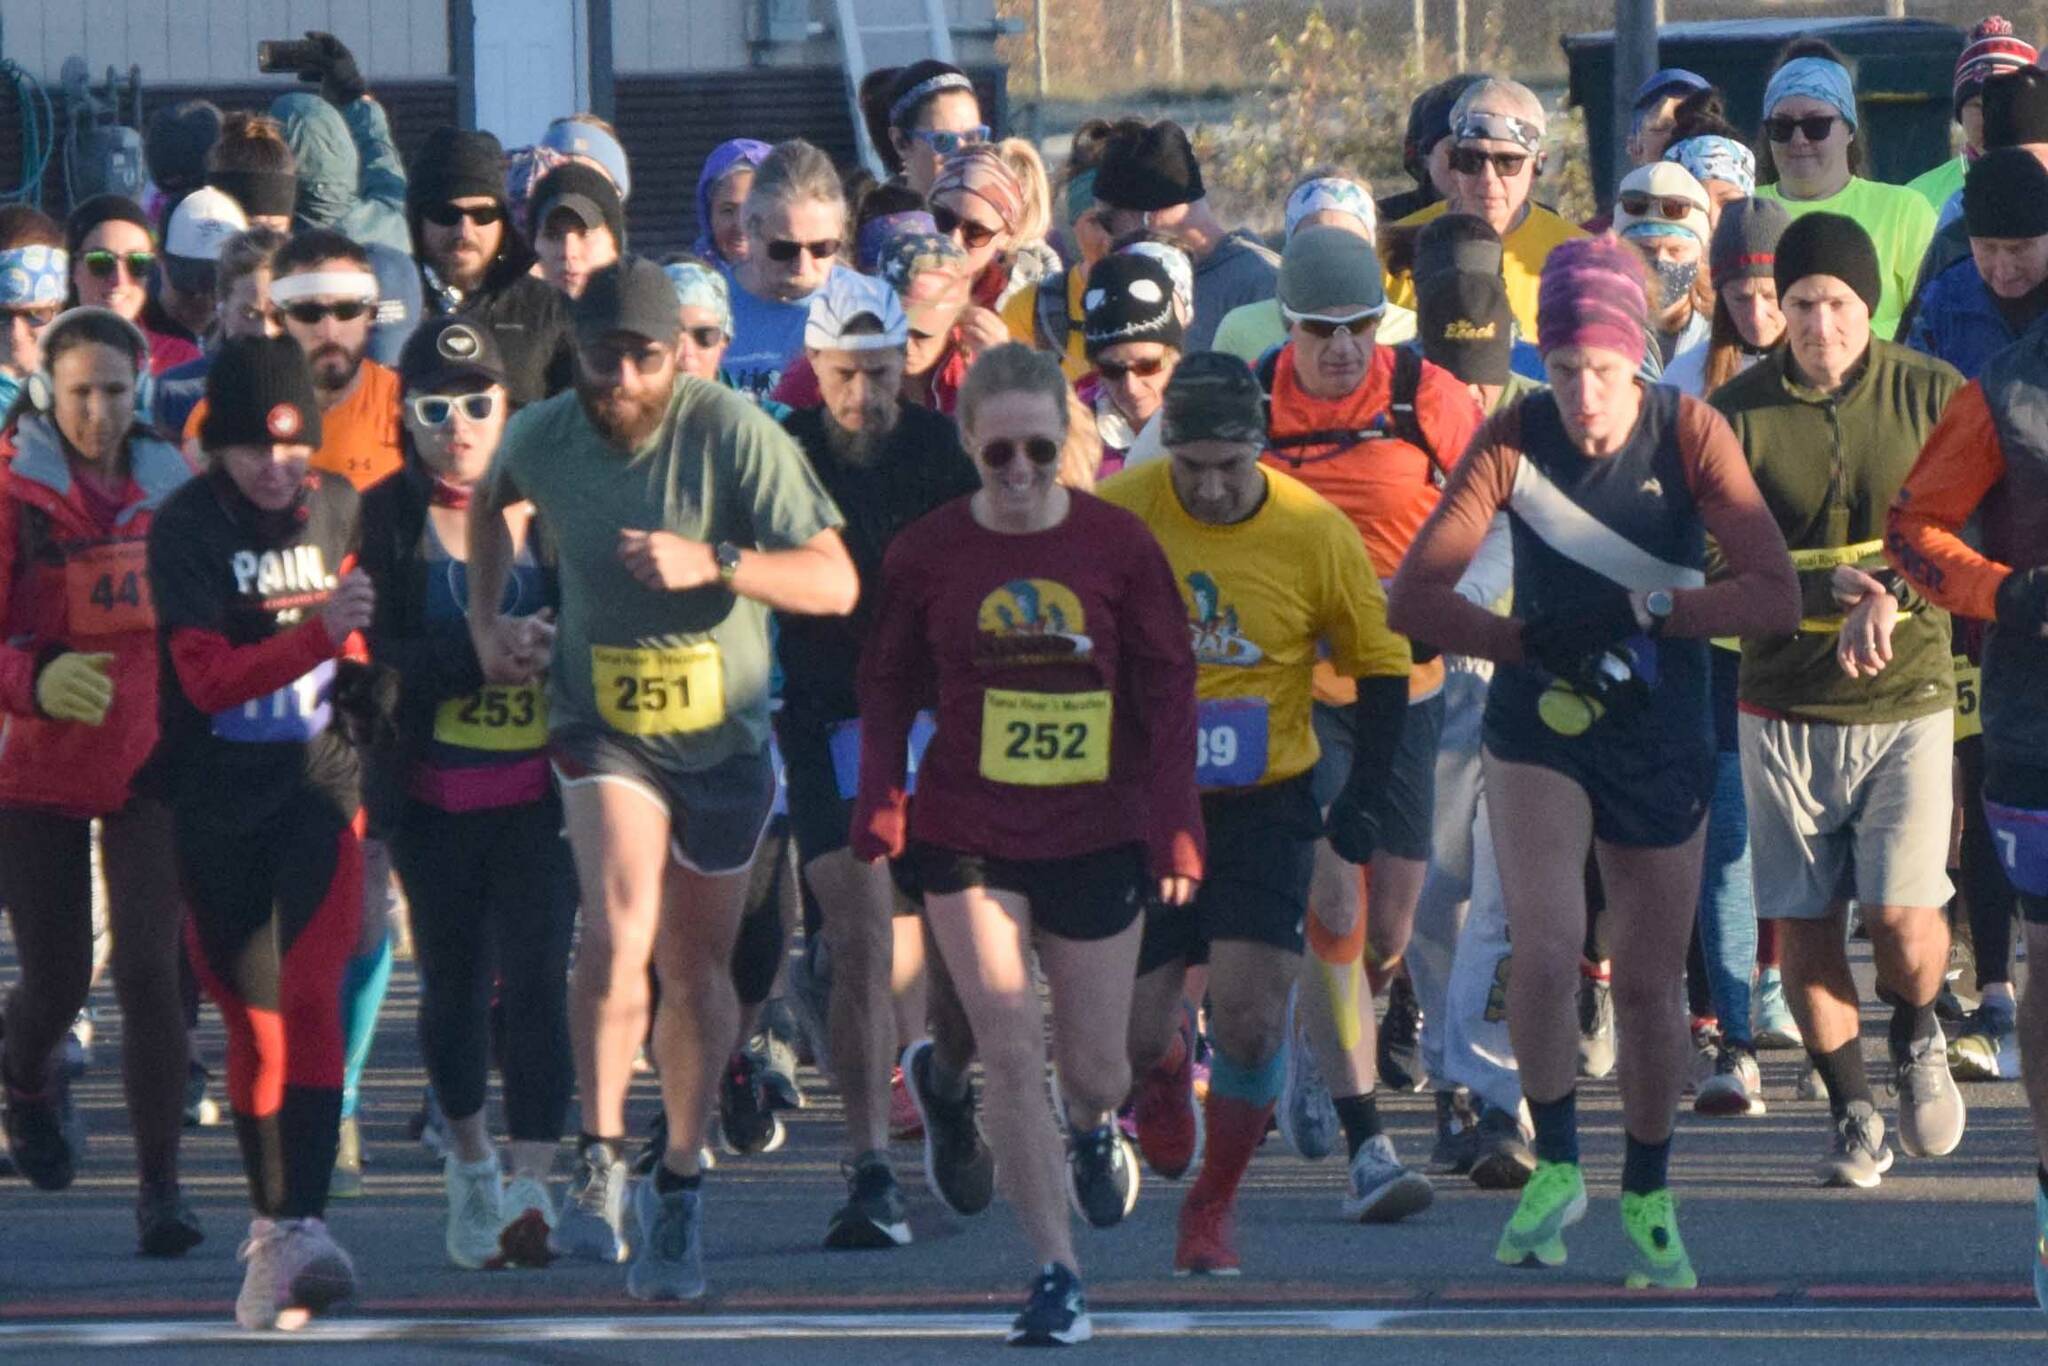 Author Kathleen Sorensen (252) and the rest of the field take off from the starting line at the Kenai River Marathon on Sunday, Sept. 26, 2021, in Kenai, Alaska. (Photo by Jeff Helminiak/Peninsula Clarion)